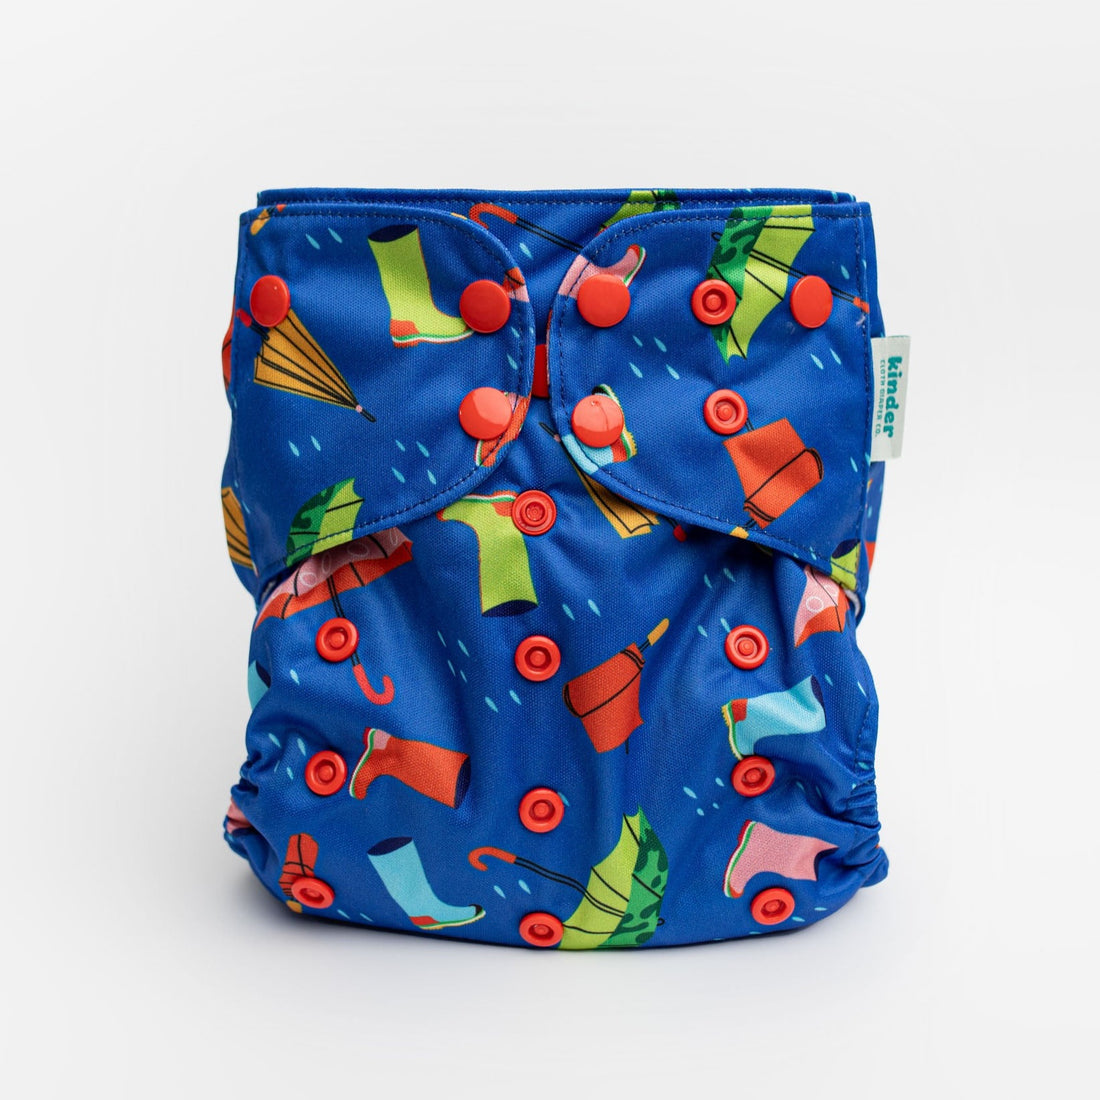 Shop All Diapers and Diapering Accessories – Kinder Cloth Diaper Co.